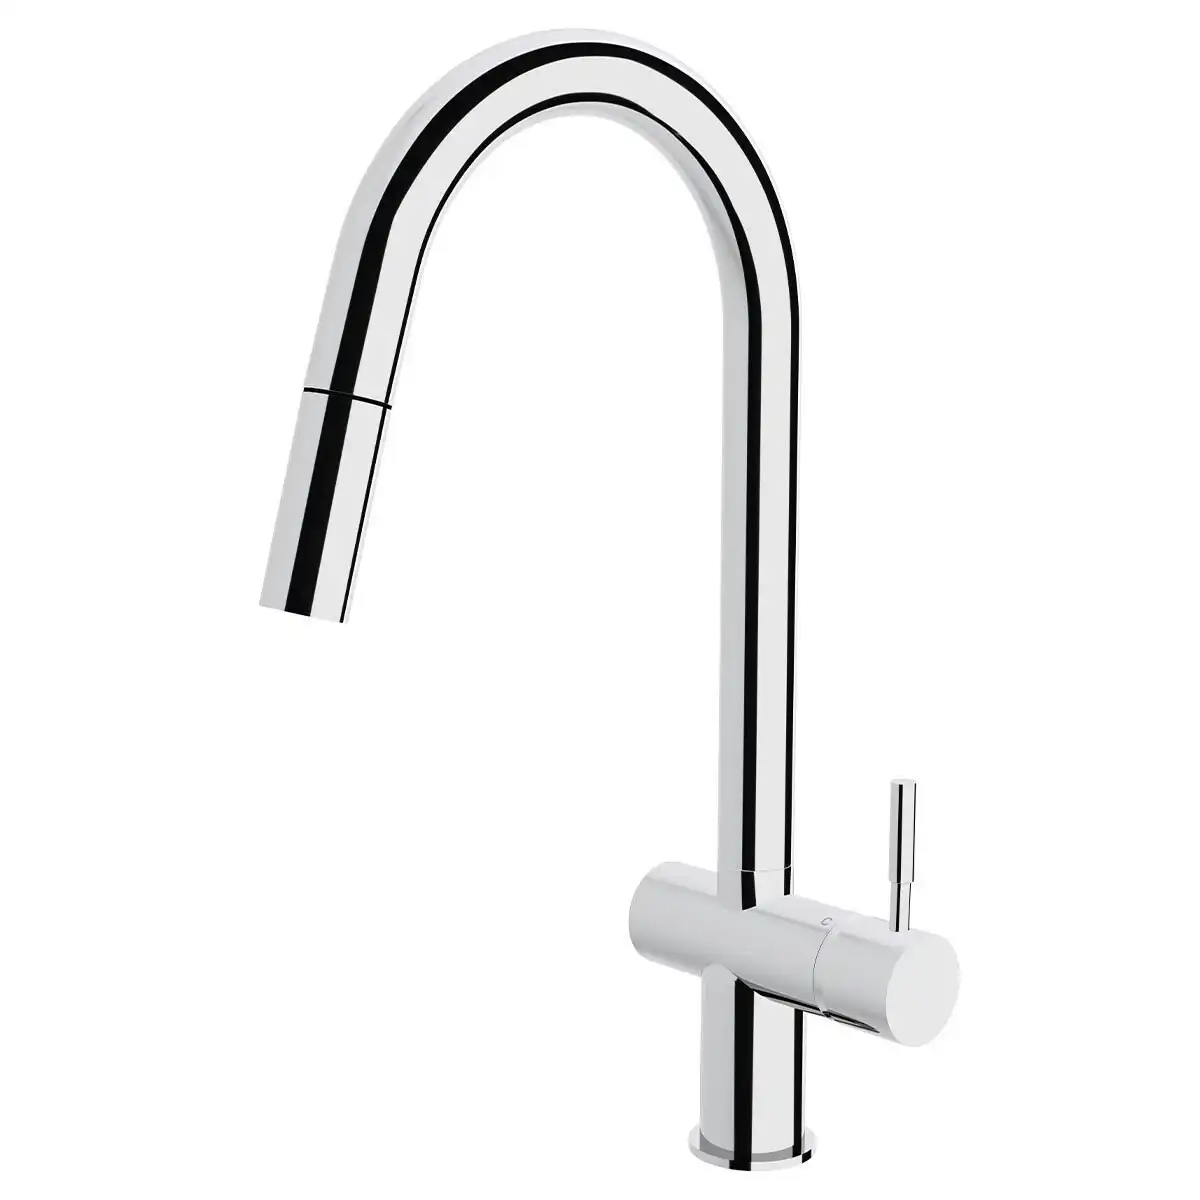 Sussex Taps Voda Pull Out Sink Mixer Tap - Chrome